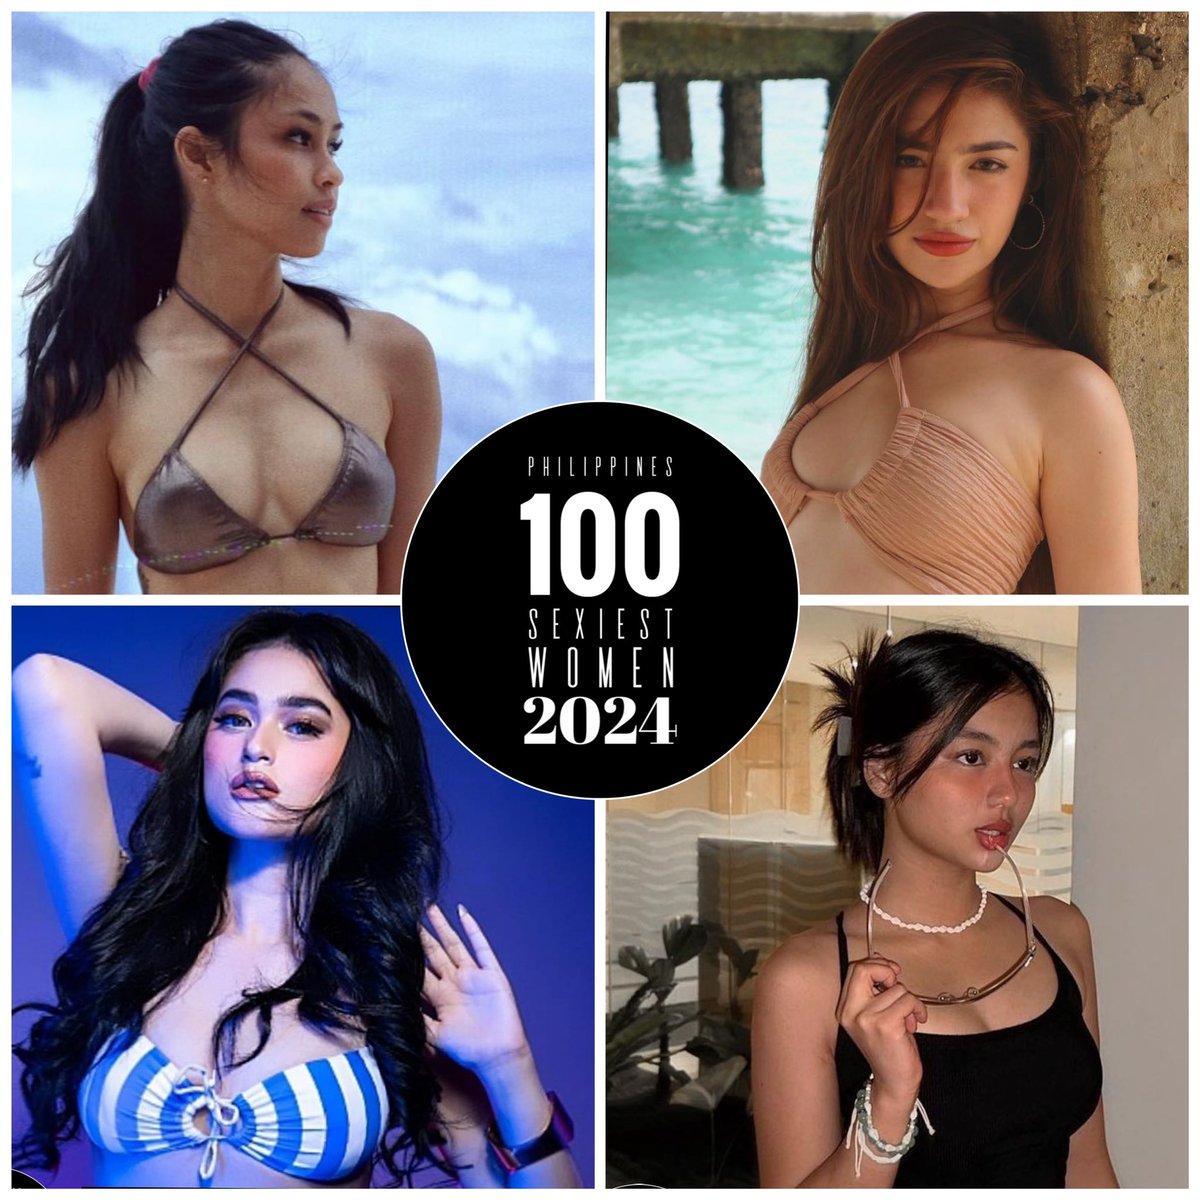 Vote Now!

#ShayneSava #DaniPorter #CrystalParas #EllaCristofani  #philippinessexiestwomen2024 

You can vote in our Social media accounts:Instagram,Facebook,Telegram,Twitter(X ) account.

The voting is until June 30,2024
The result will be announced on July 20,2024.